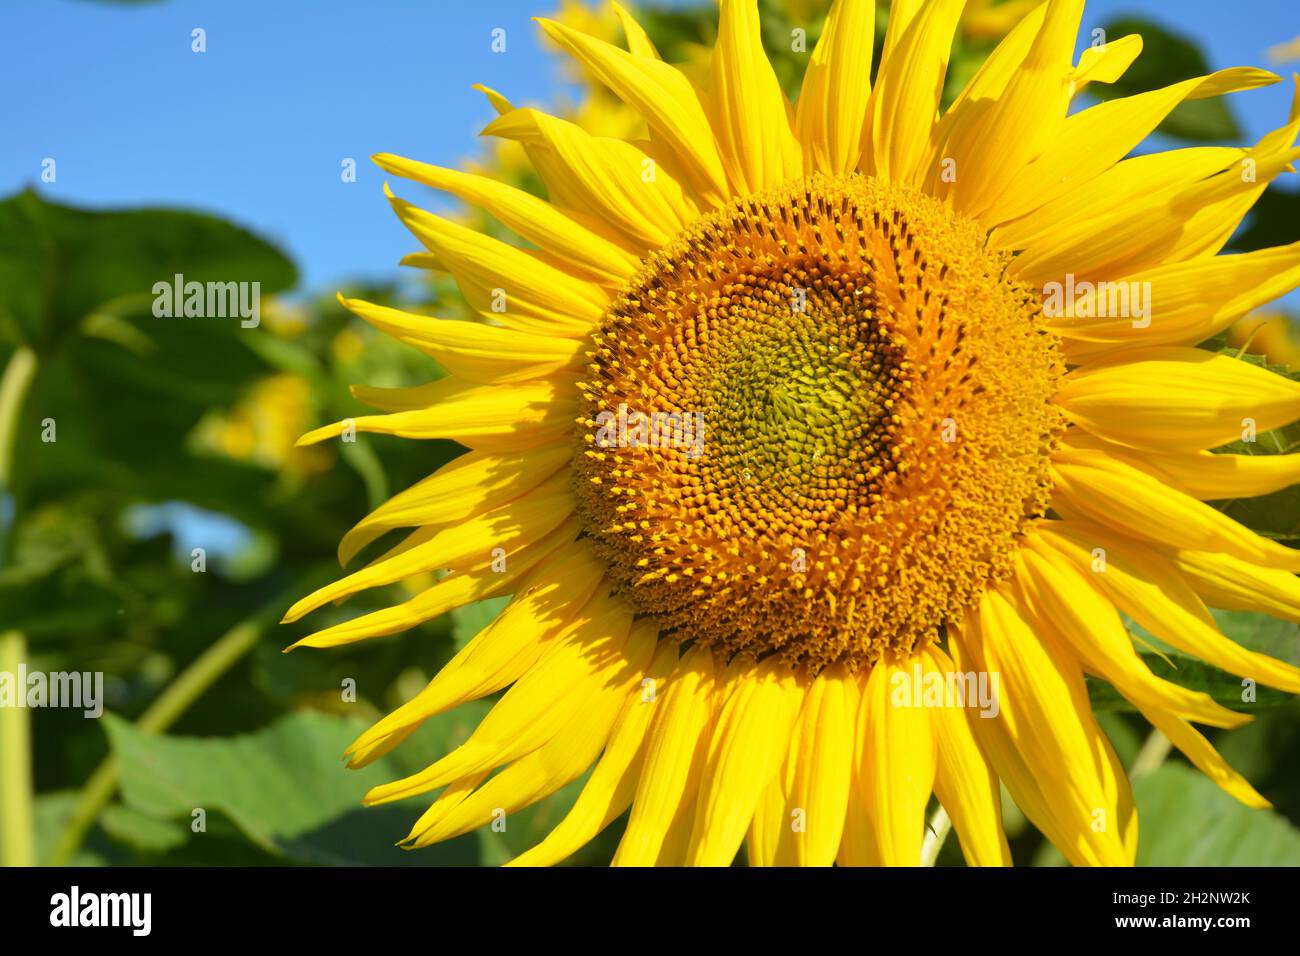 Sunflower Wallpapers 72 images